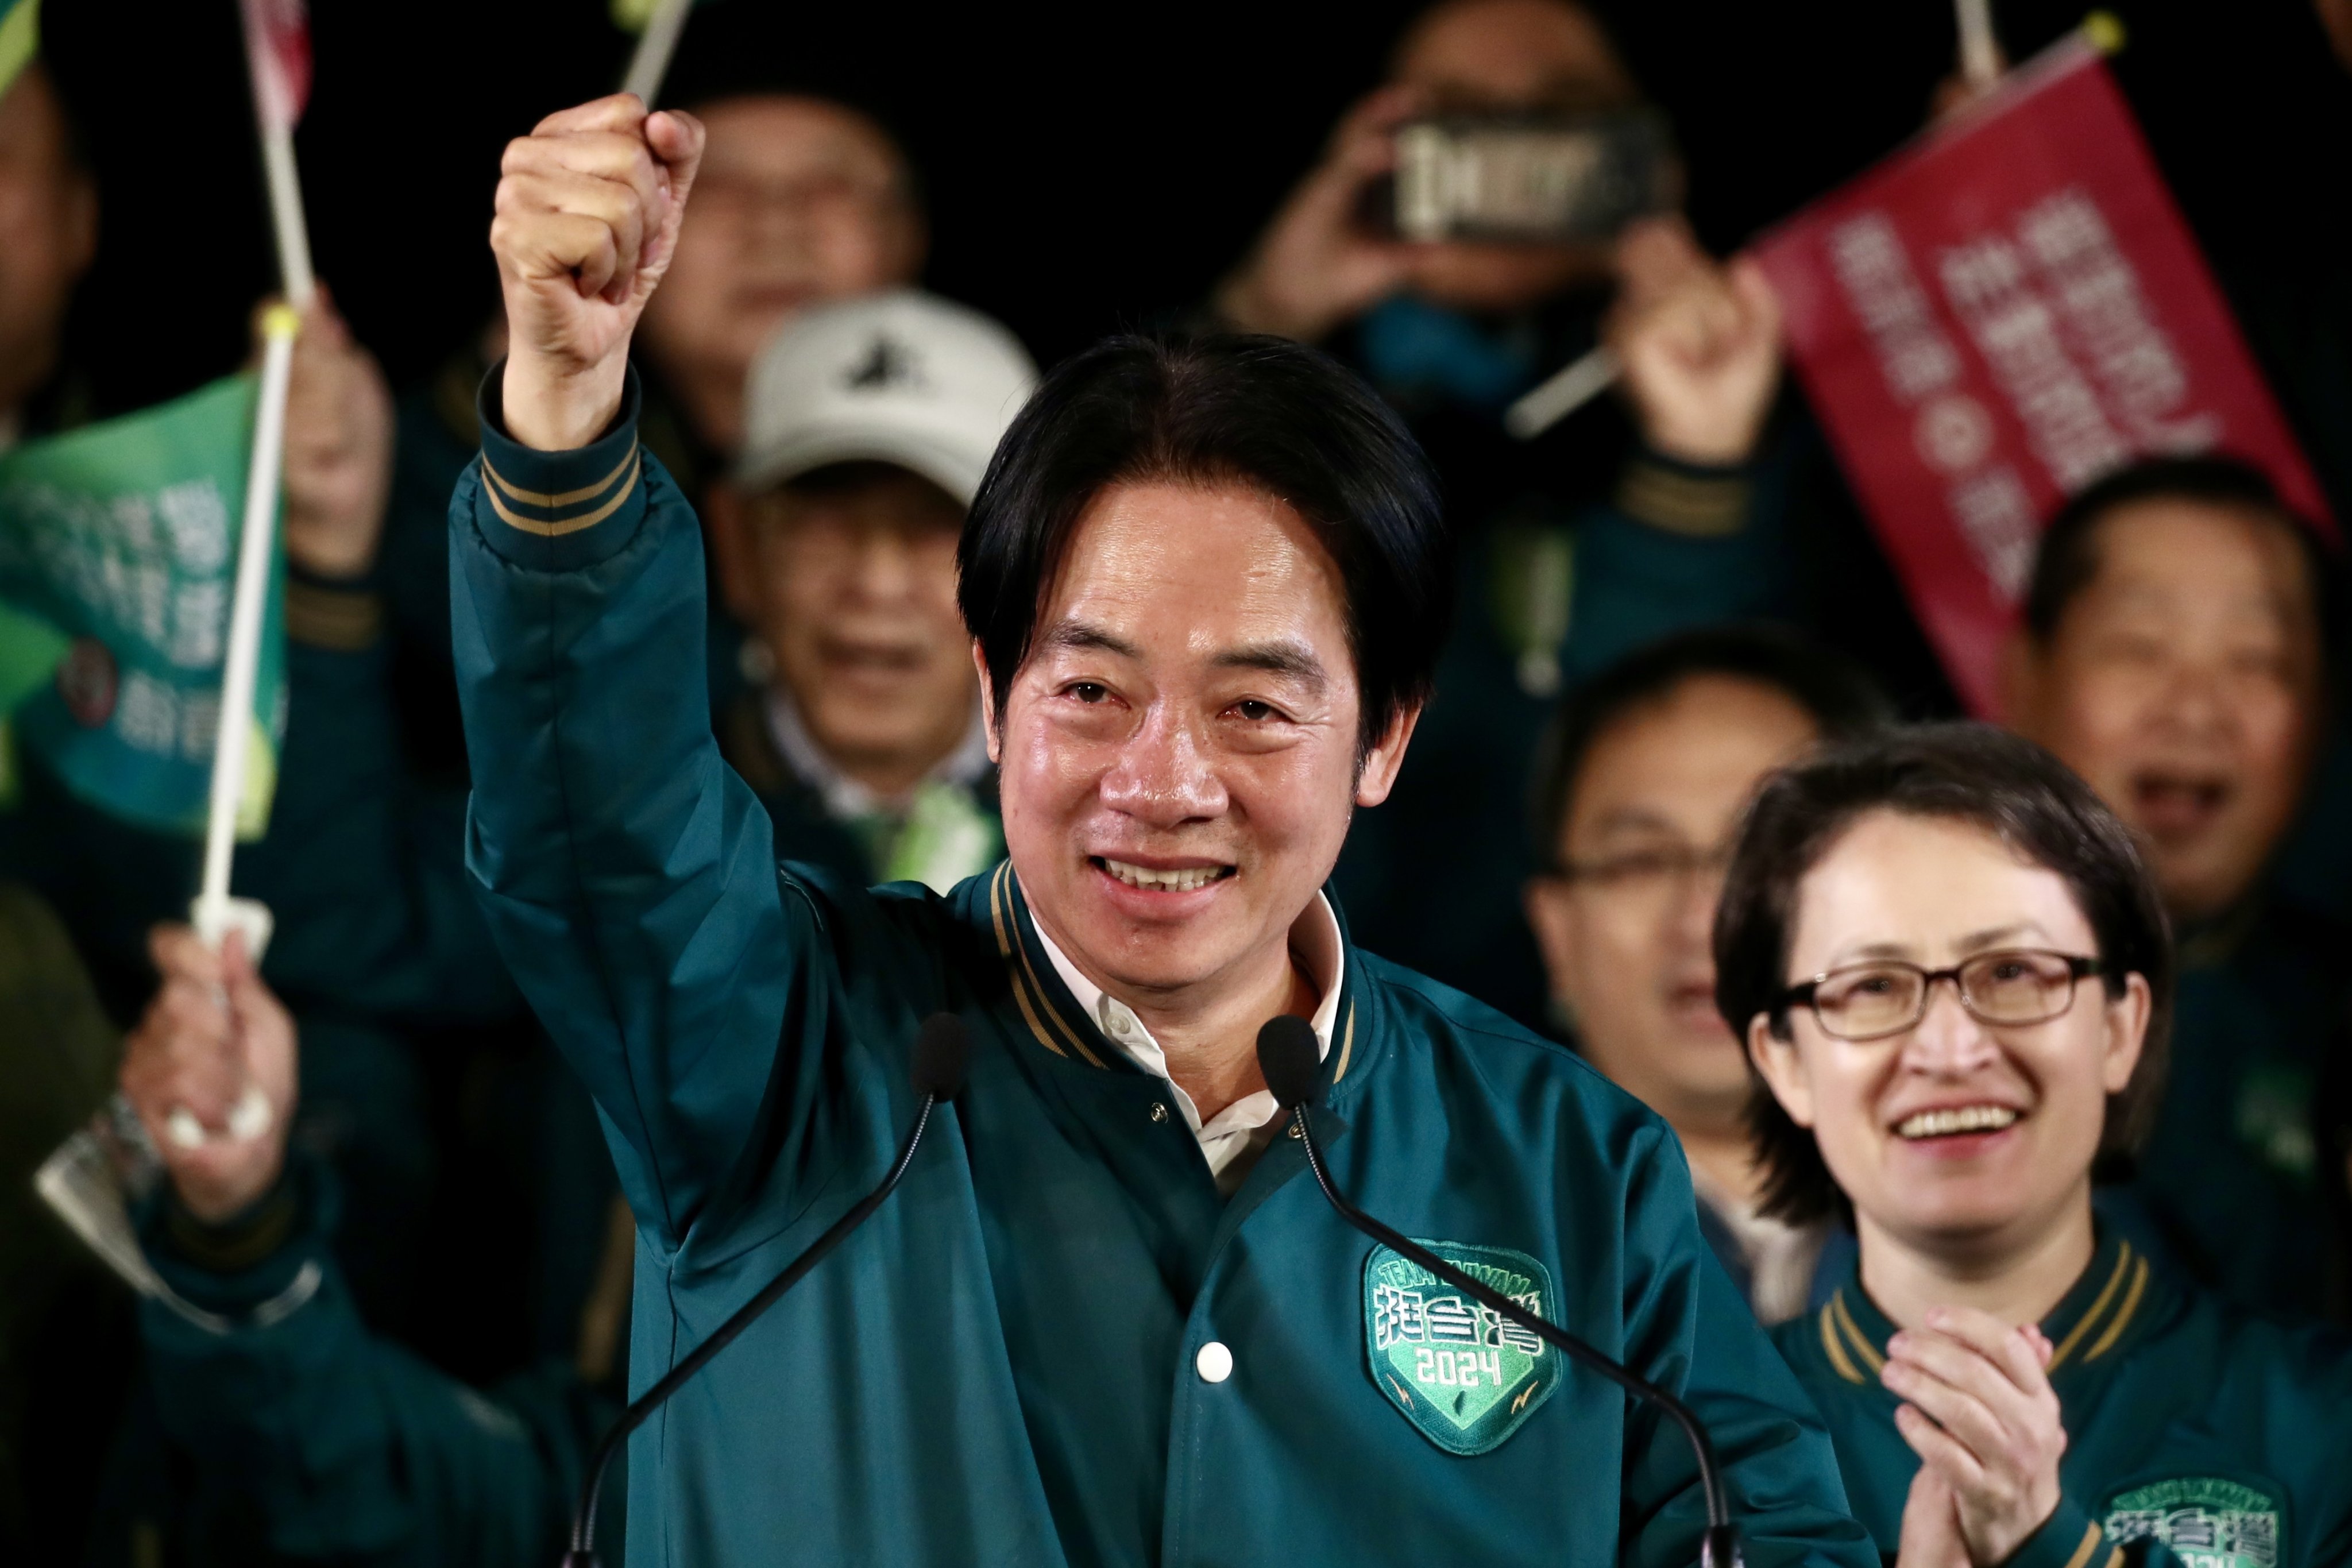 Taiwan’s Vice-President William Lai will be sworn in as the island’s next president on May 20. Photo: EPA-EFE